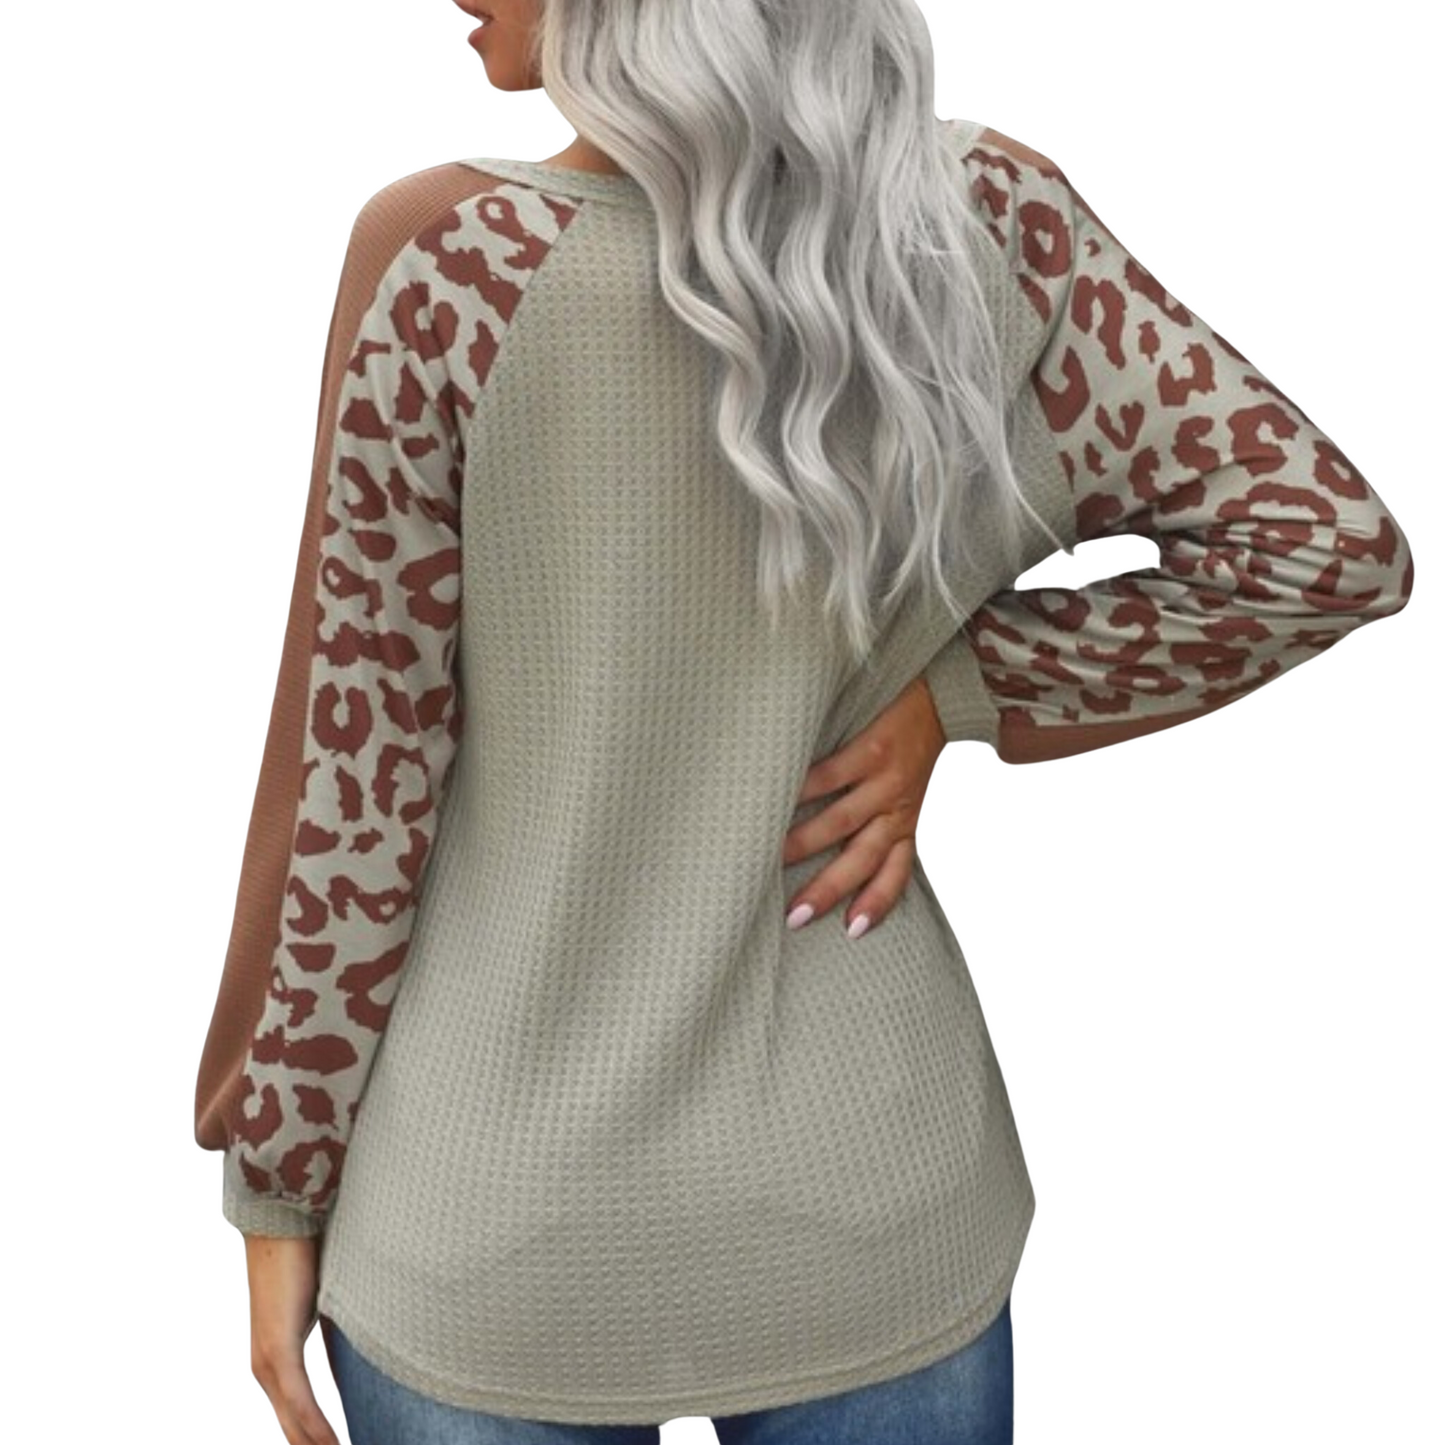 Add a stylish twist to your everyday look with our Animal Print Thermal Top, available in regular and plus size for a perfect fit. This thermal top combine's comfort with style, featuring long sleeves with animal print accents. Look fashionable and stay warm all winter long.